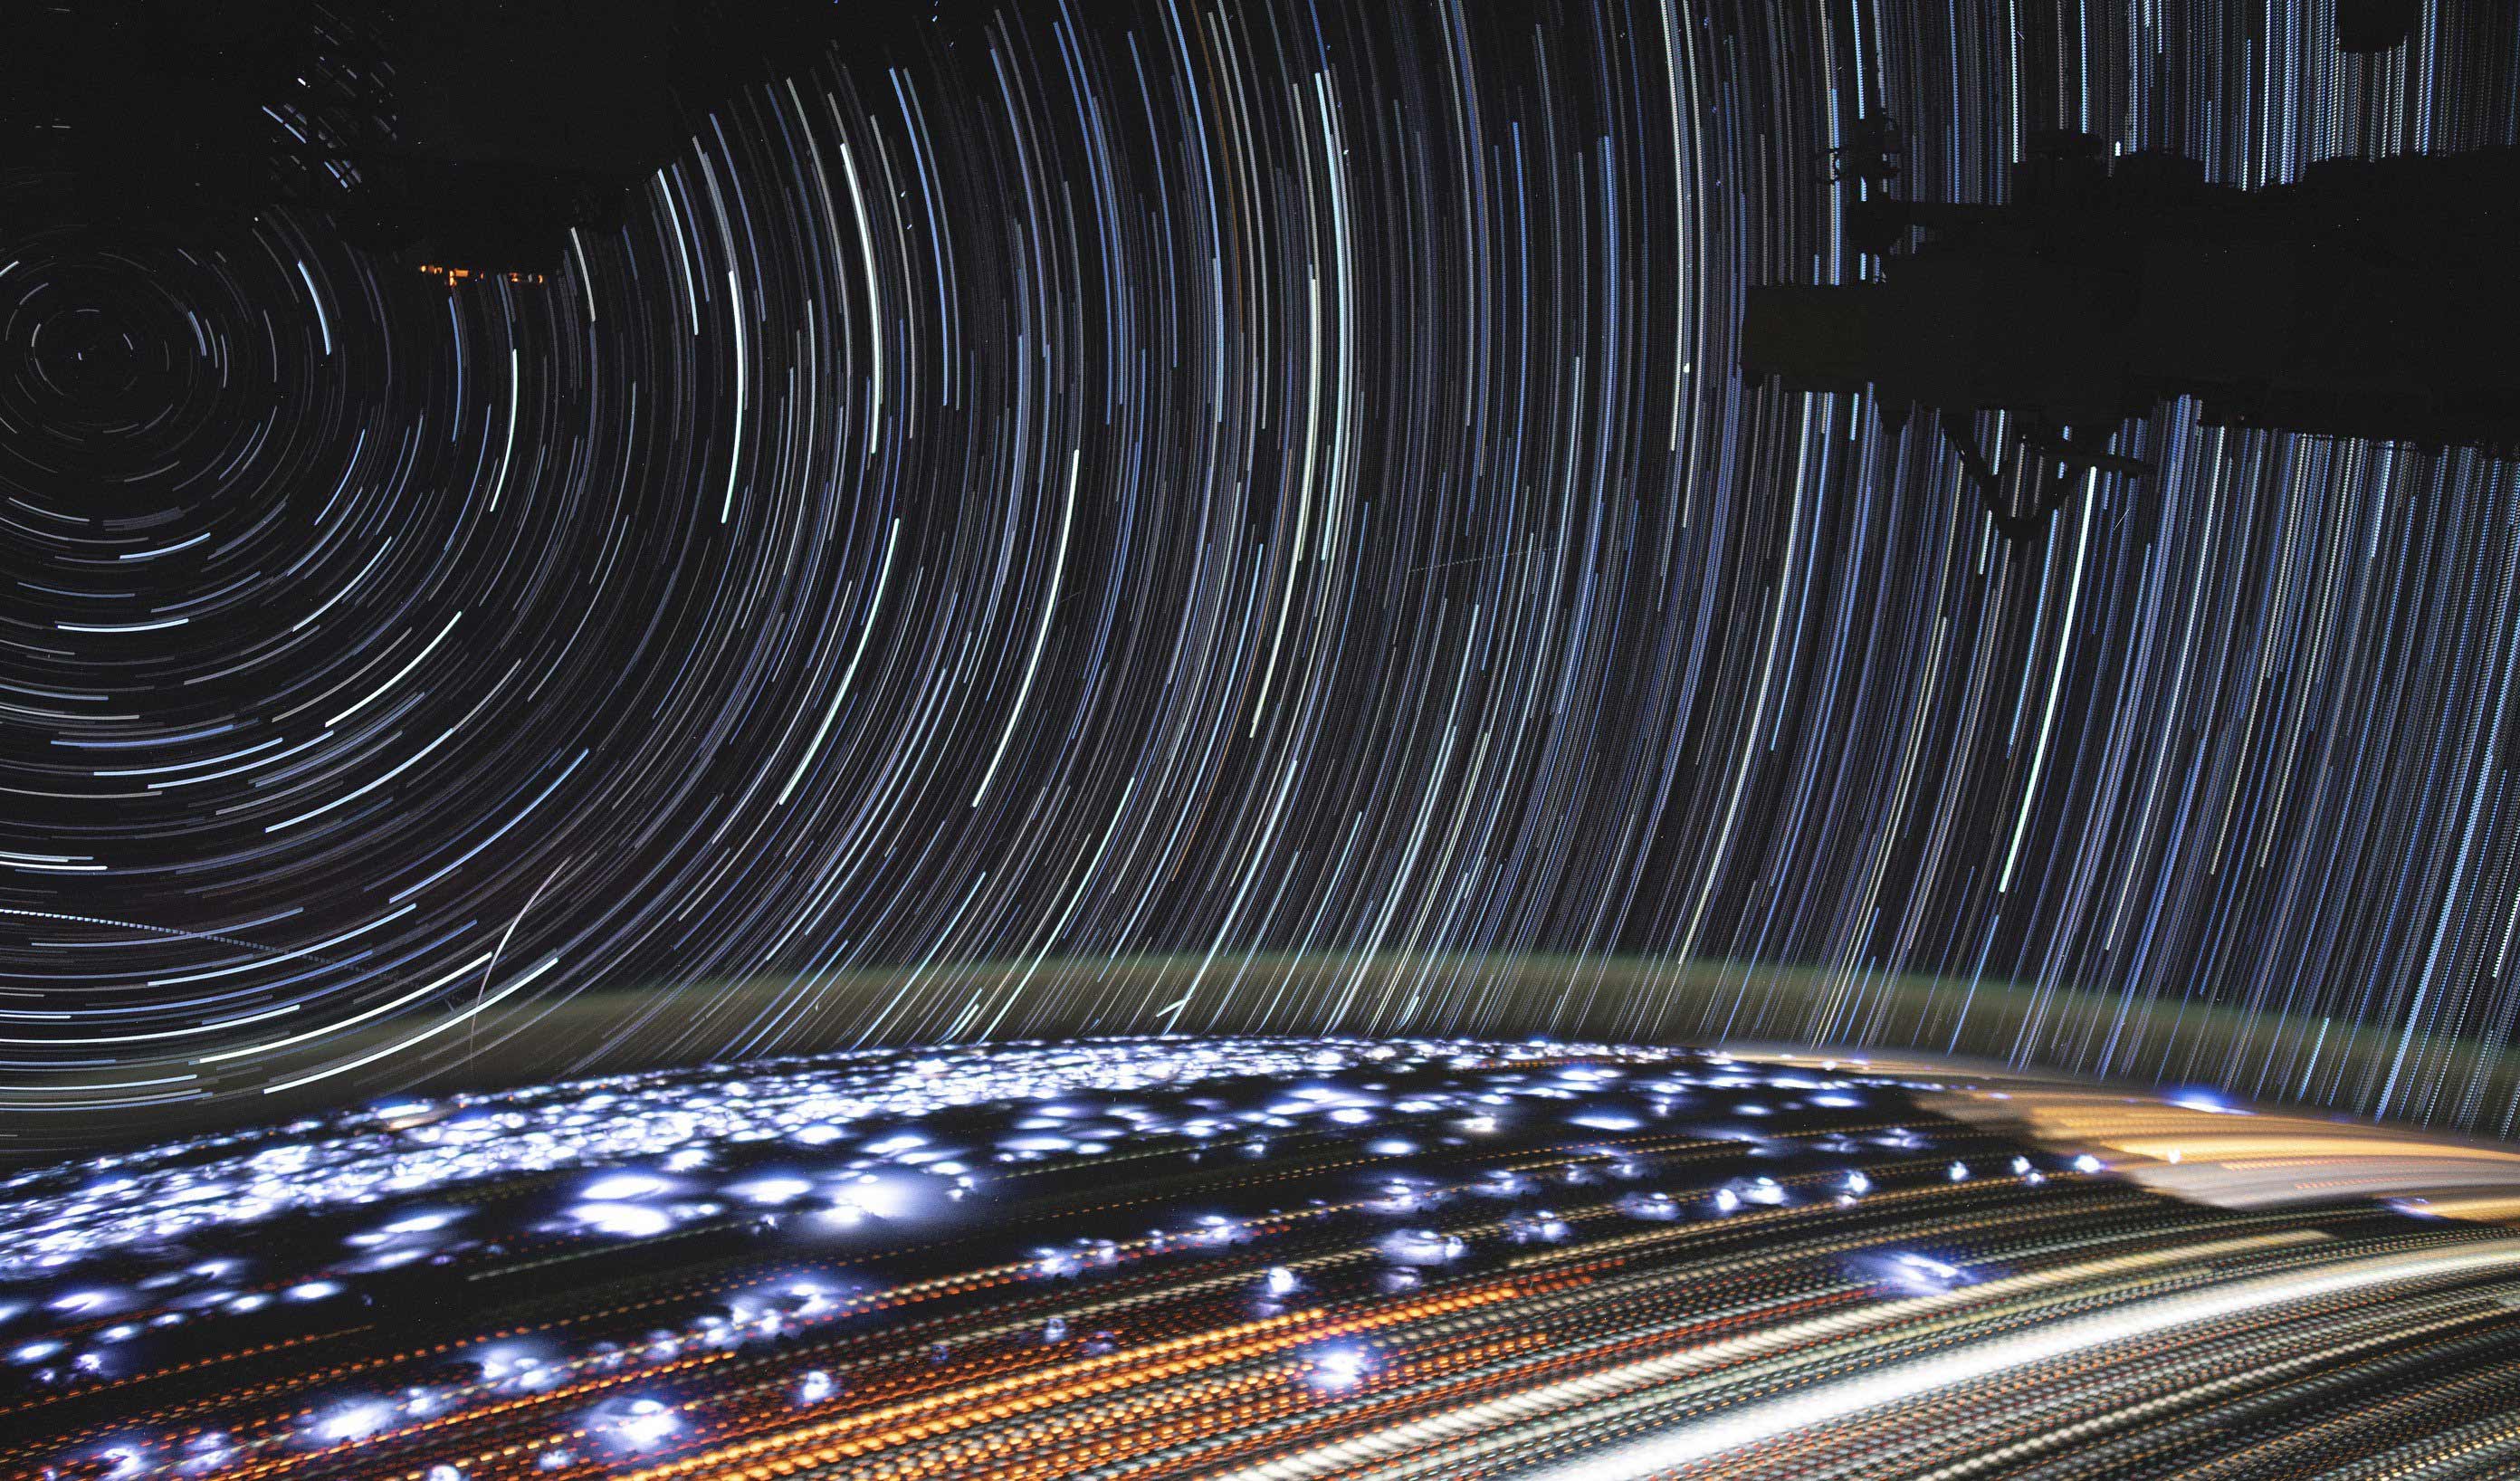 Music plays even where emptiness lives. The song of circling stars has amazed us inconclusively for years.. This image of star trails was compiled from time-lapse photography taken by NASA astronaut Christina Koch while onboard the International Space Station.